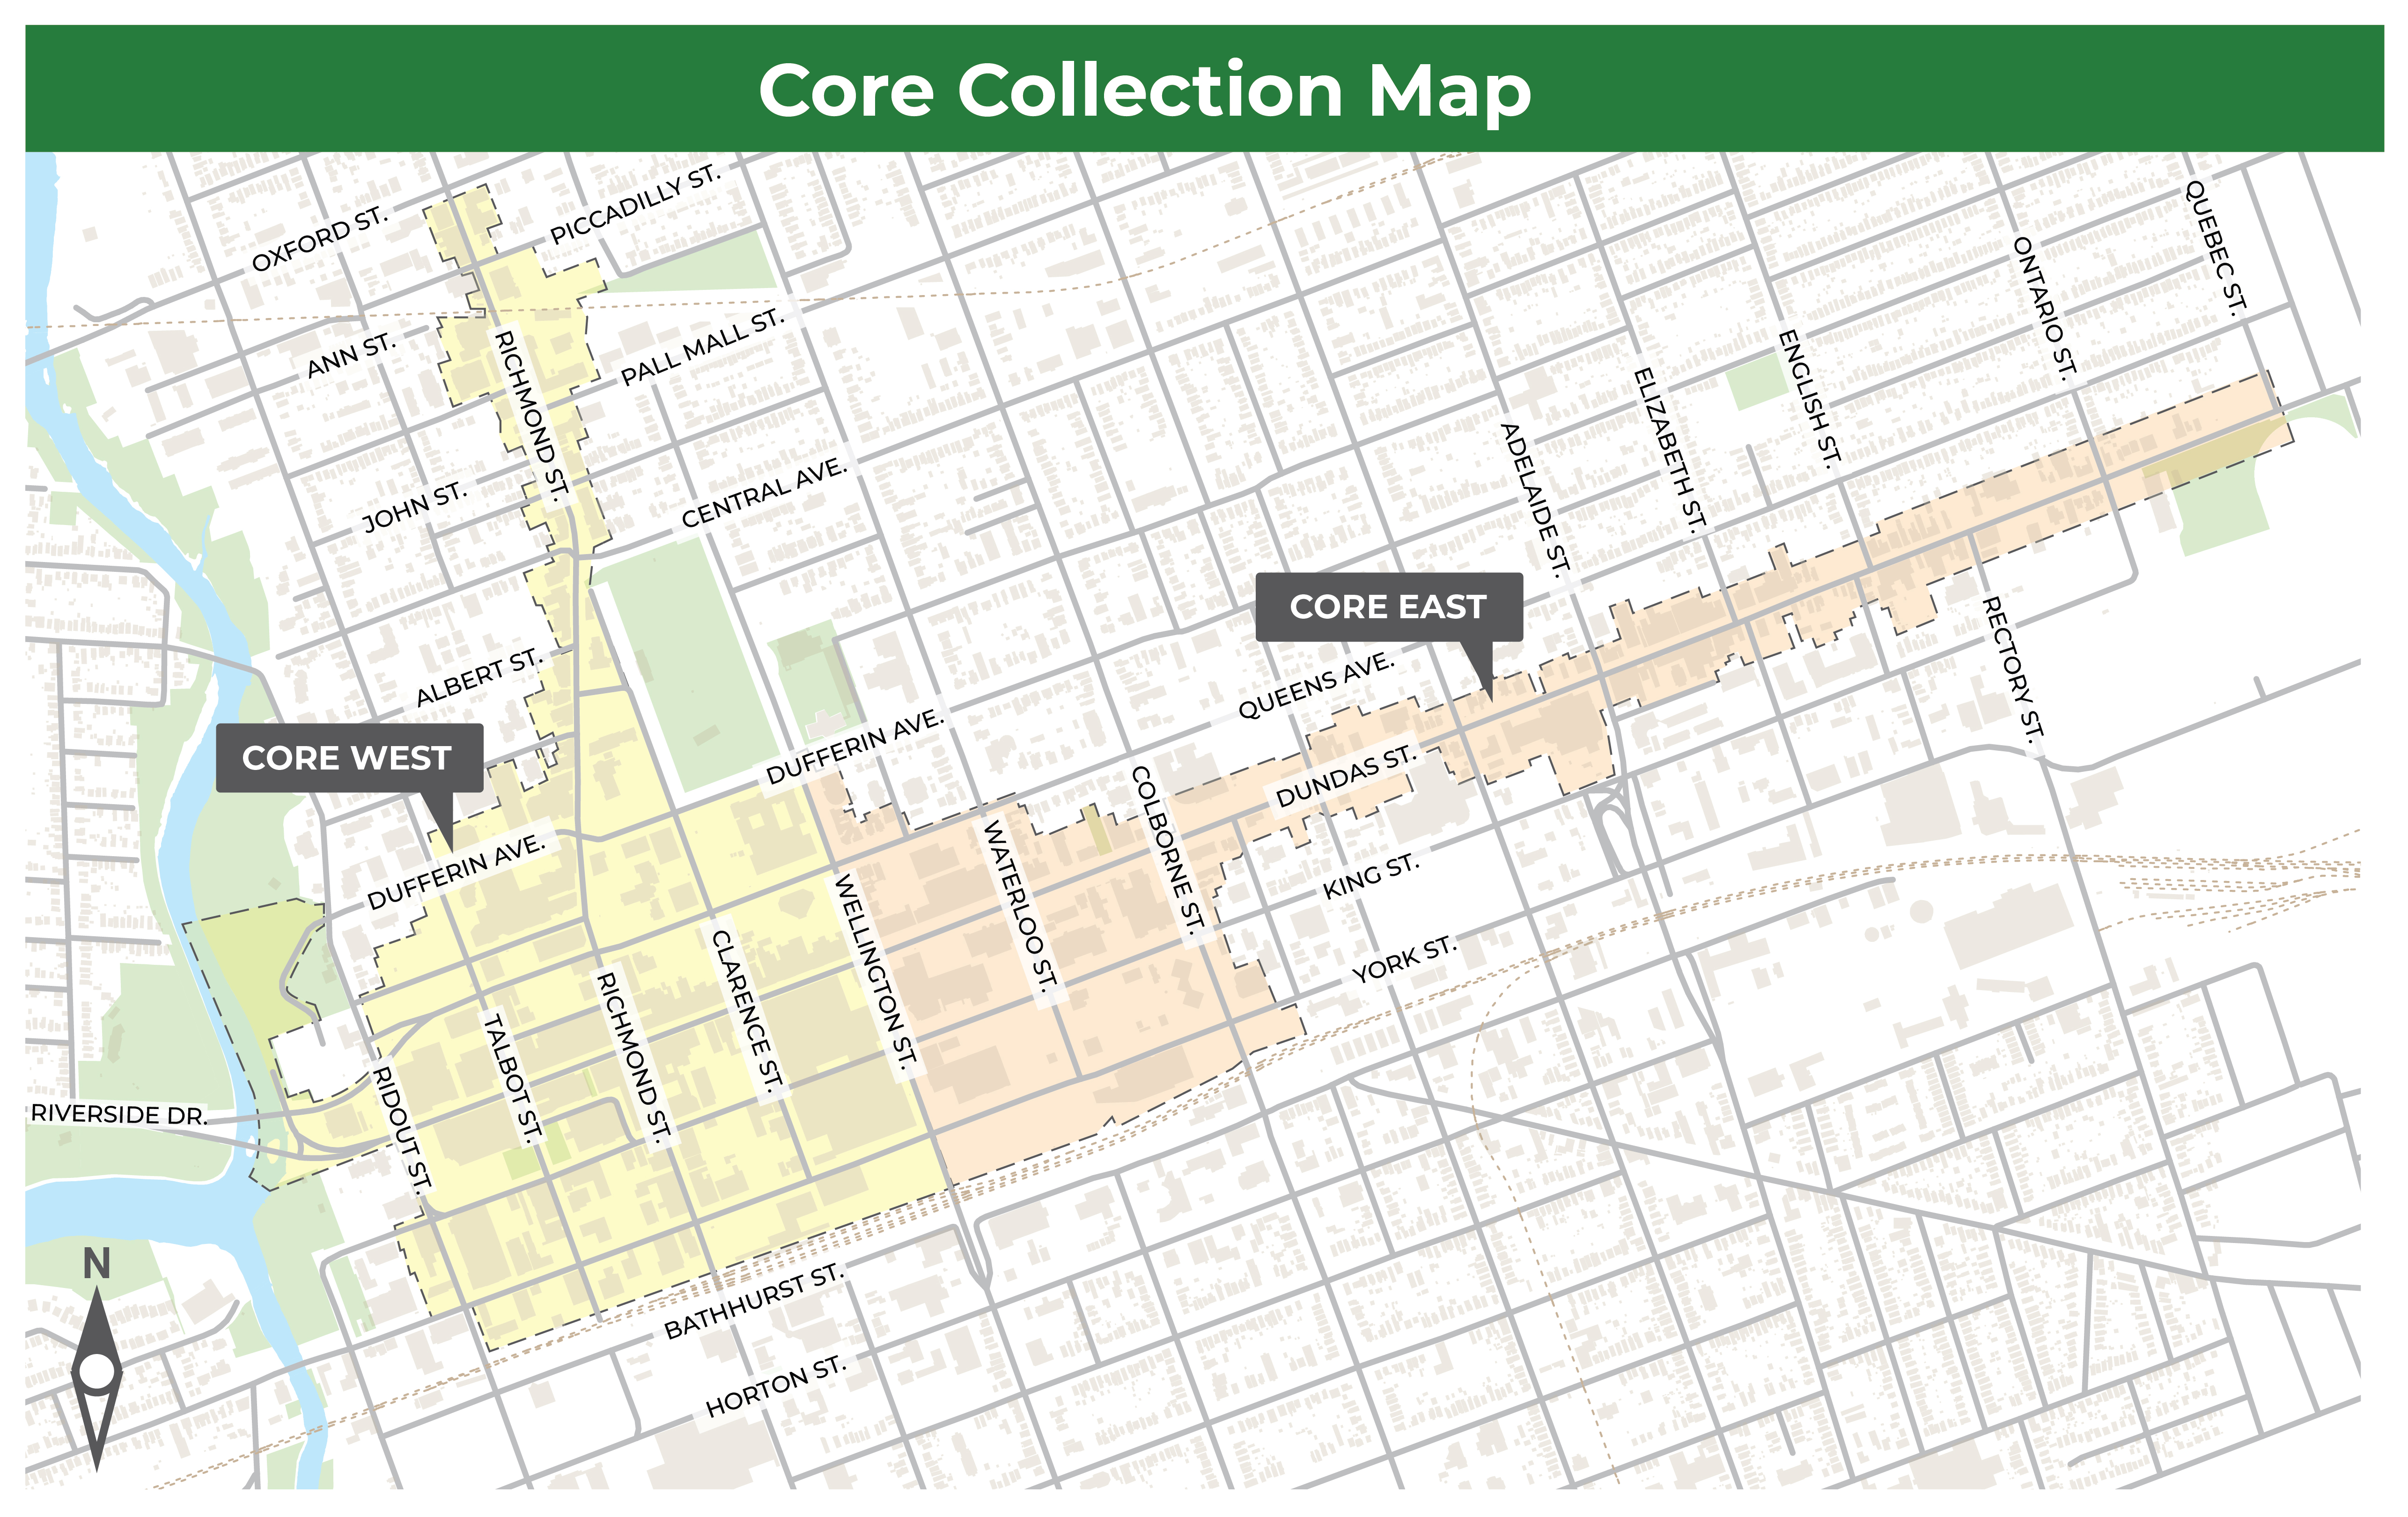 A map of the Core garbage collection area. For assistance, please contact cocc@london.ca